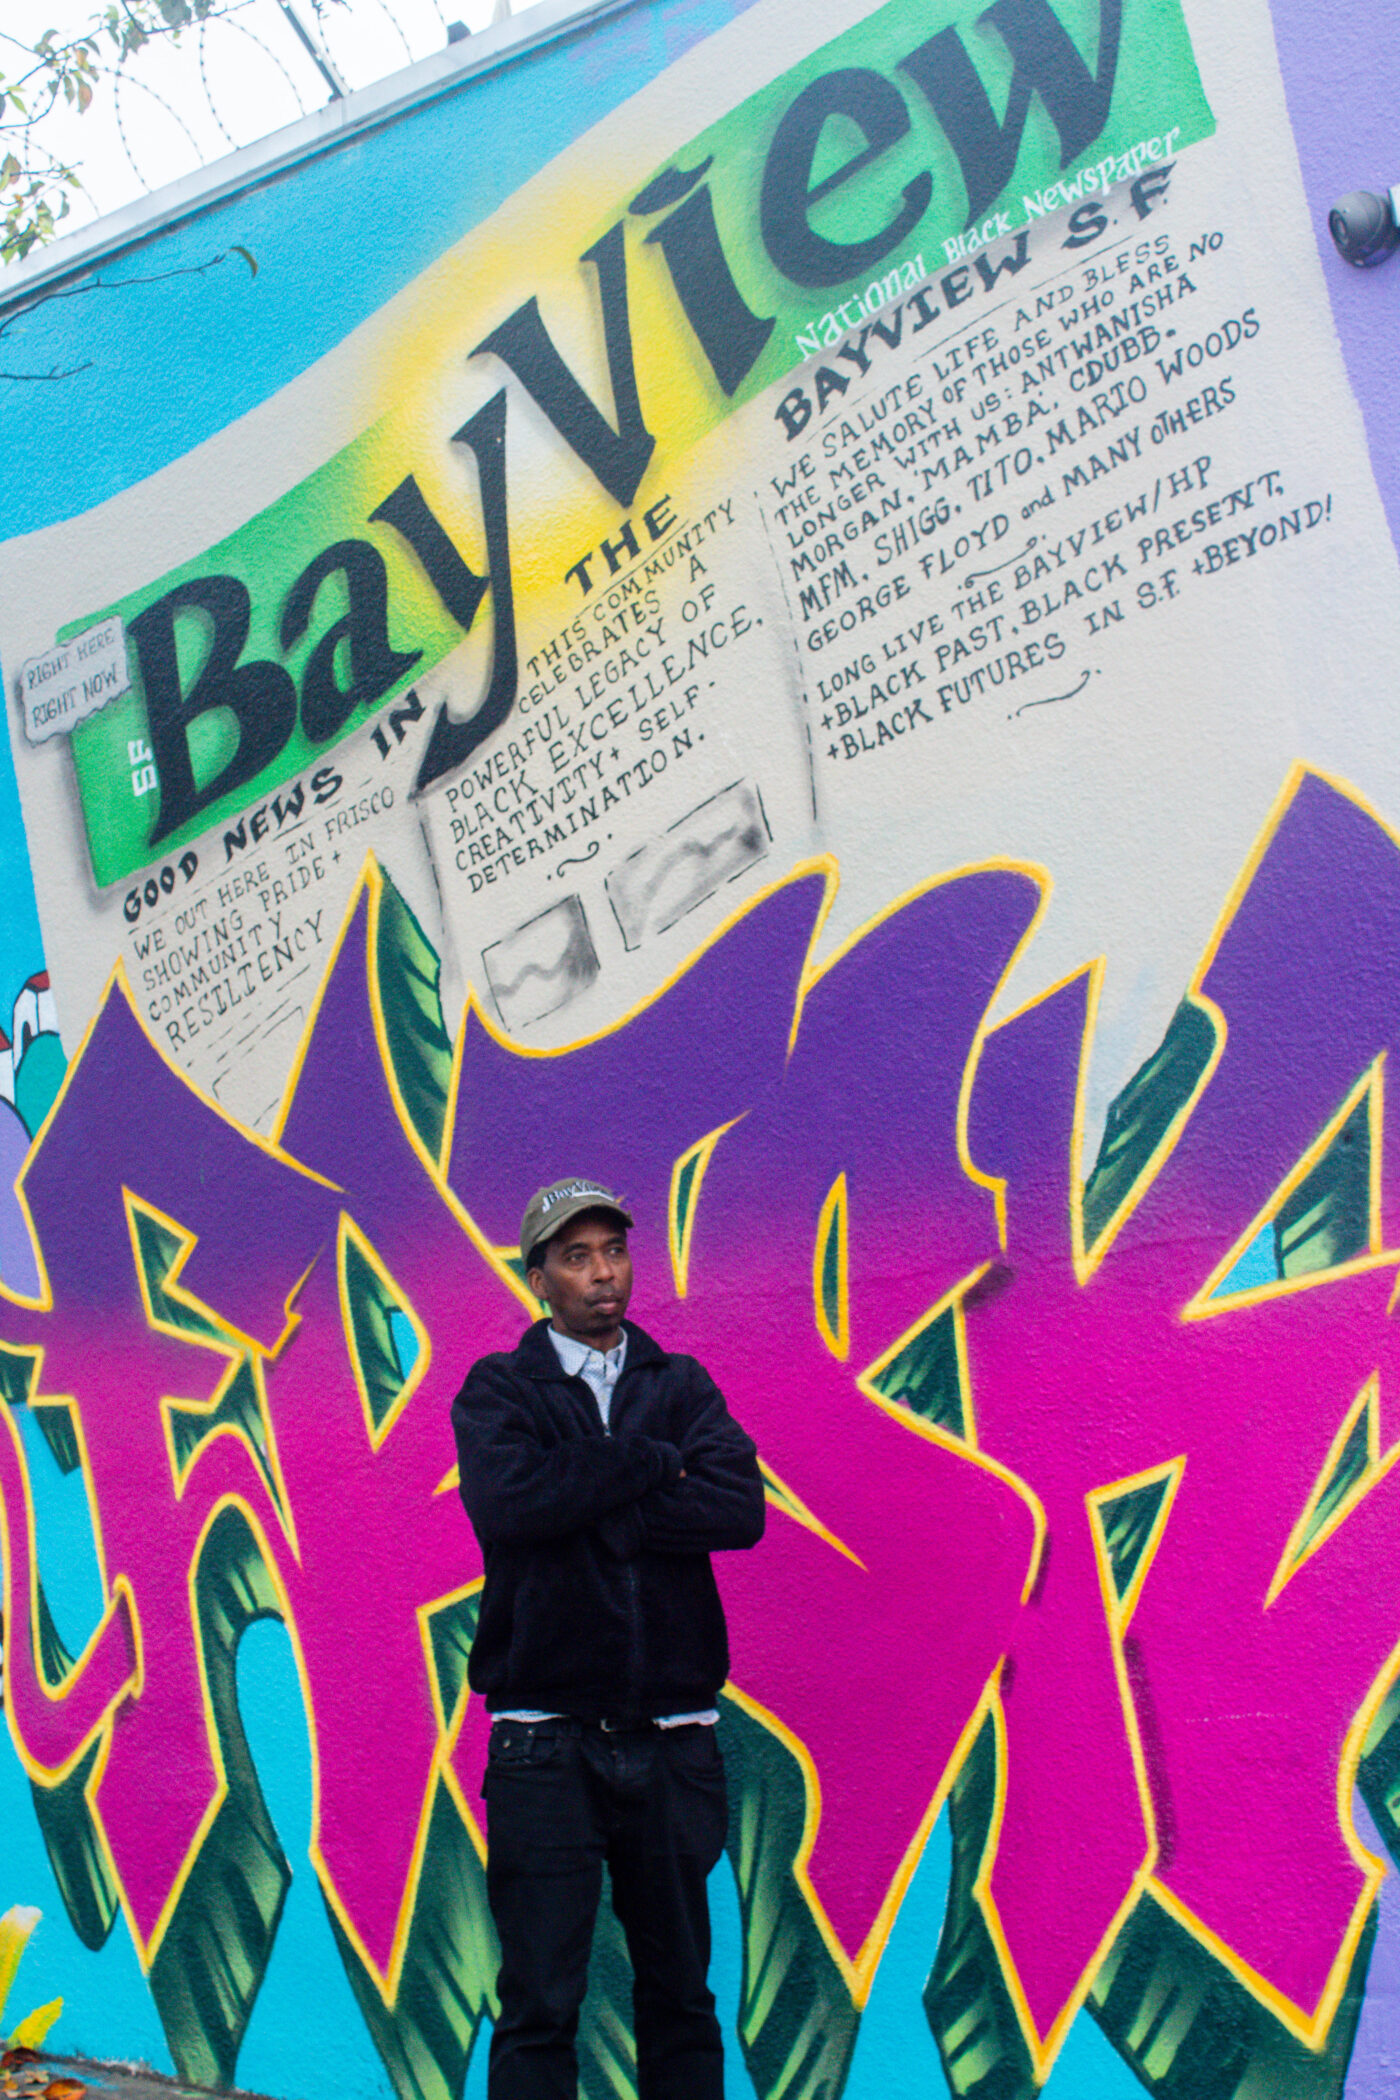 Bay-View-mural-3rd-Quesada-Kevin-Epps-Frisko-0124-by-Kevin-Epps-1400x2100, Legendary filmmaker Kevin Epps takes the reins of the Bay View, World News & Views 